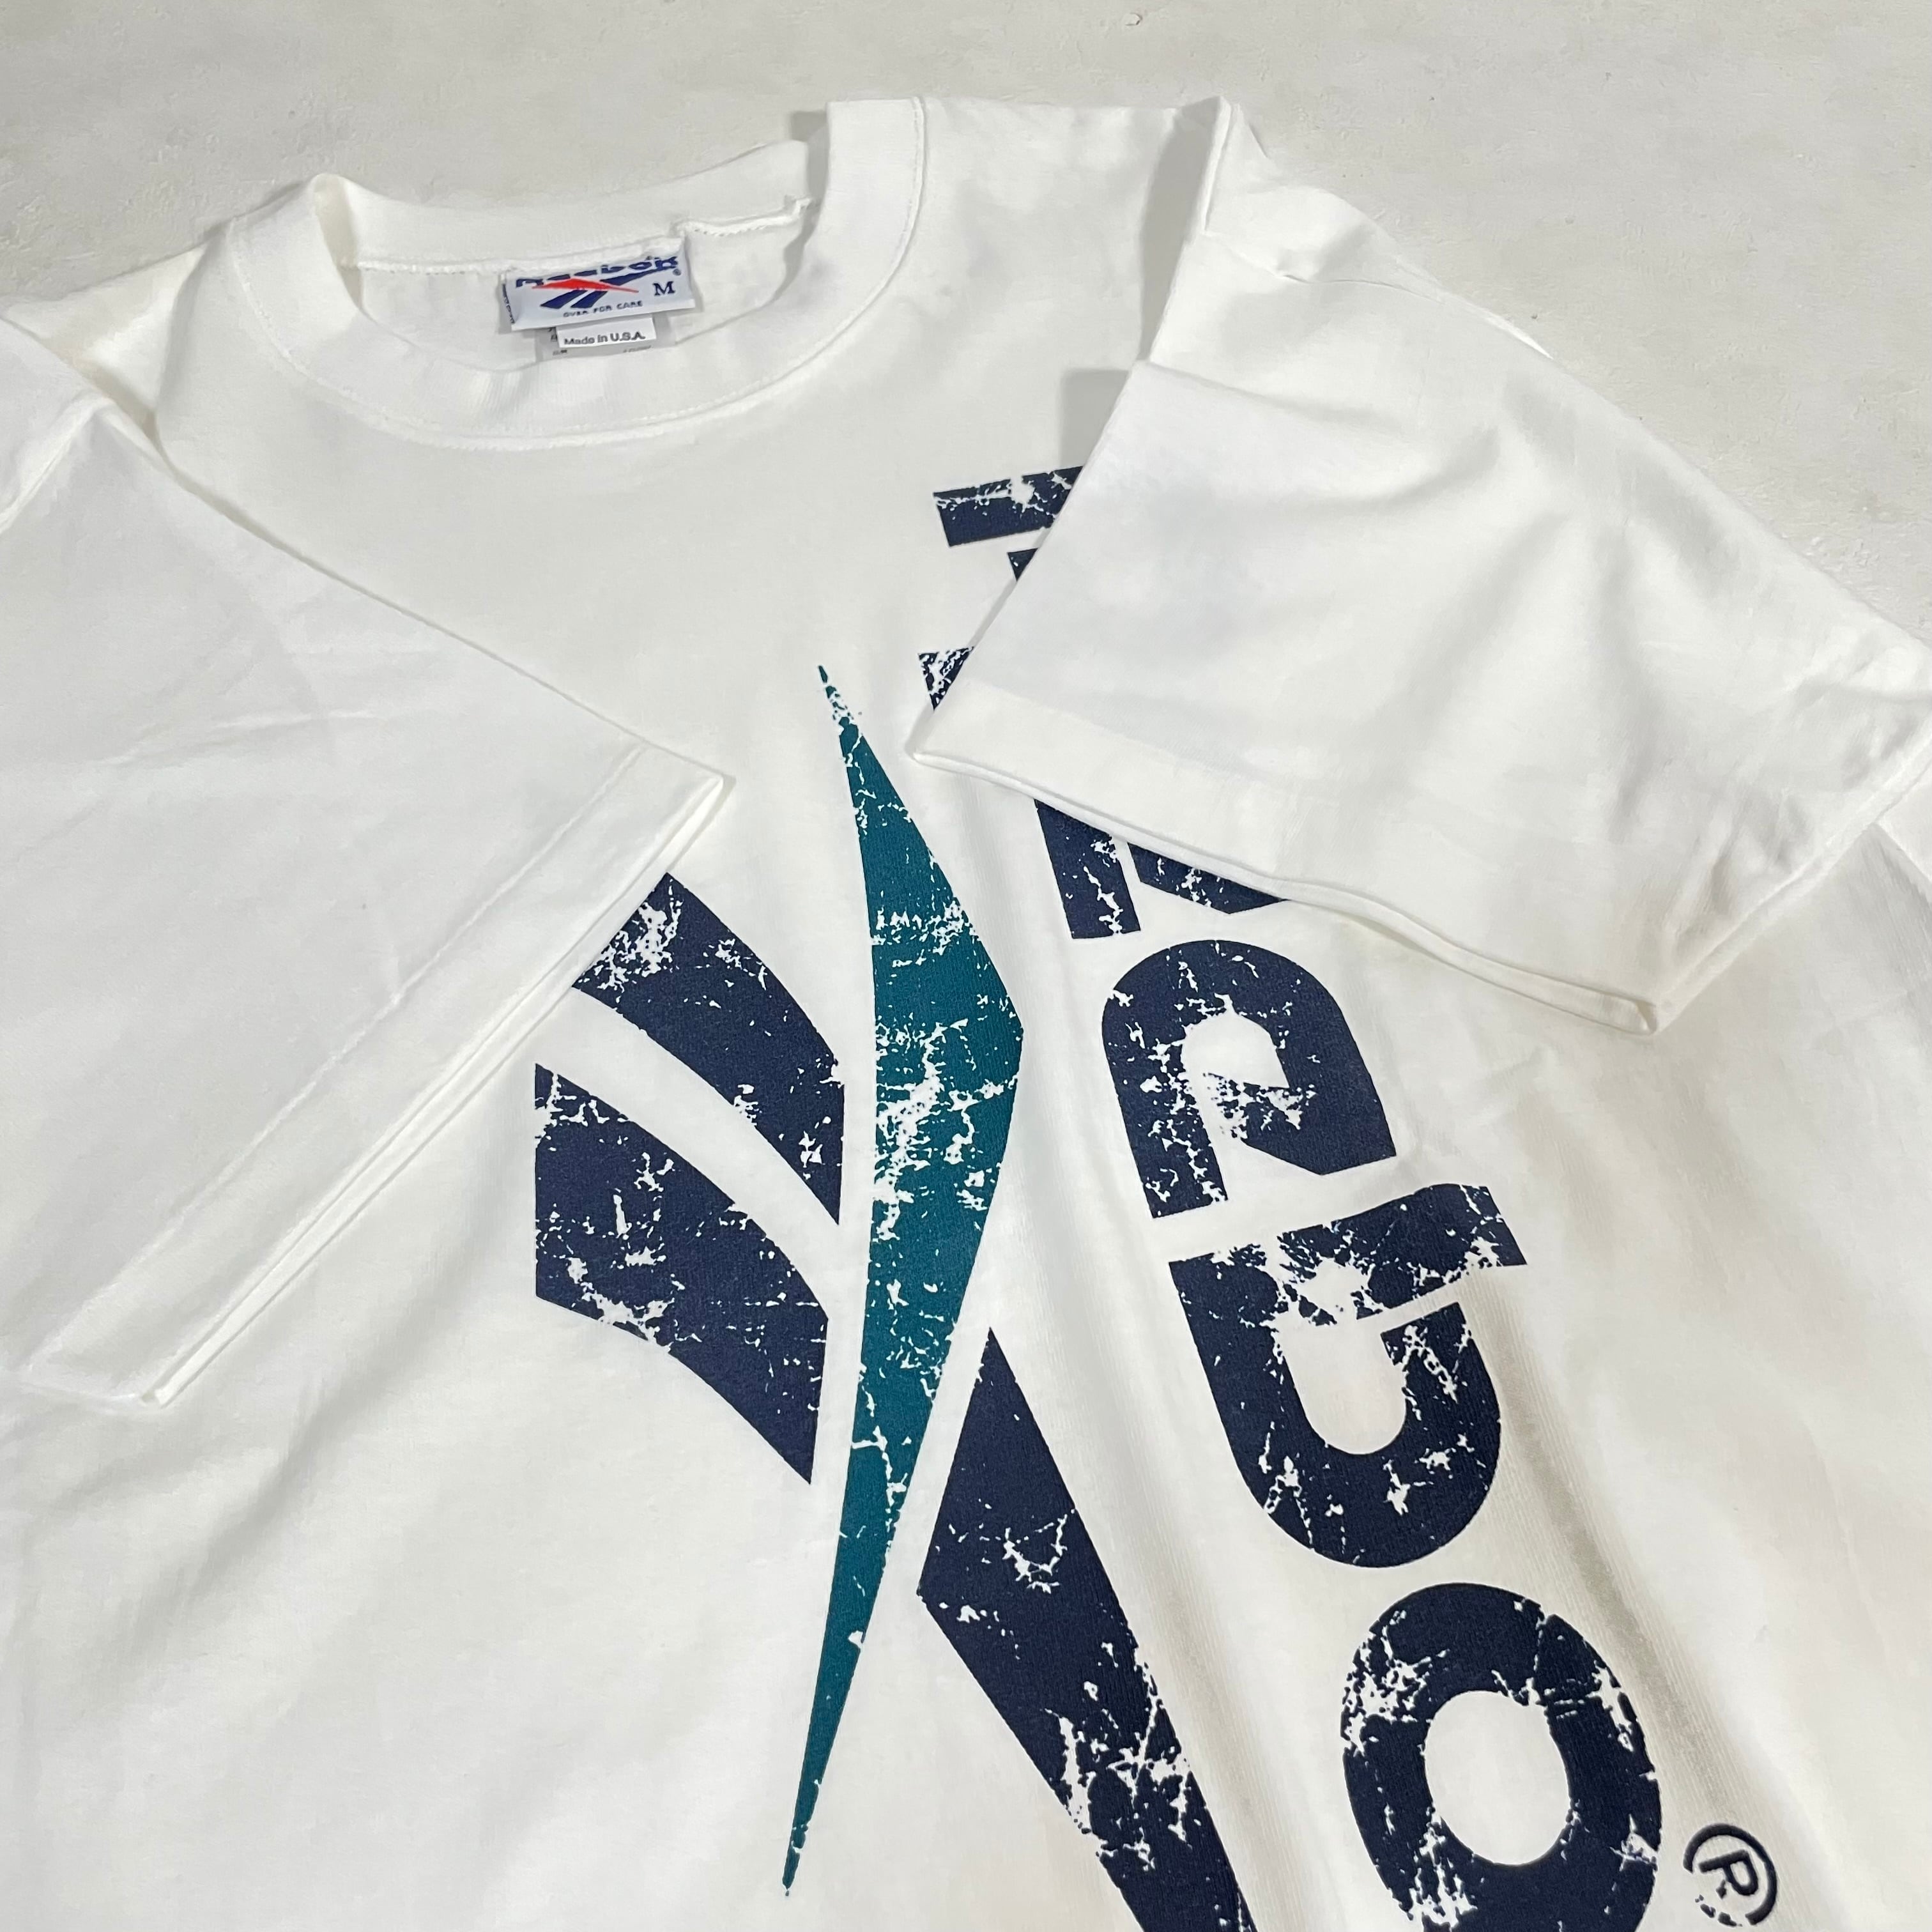 90s USA製 Reebok Tシャツ ロゴ シングルステッチ | 古着屋DAISY